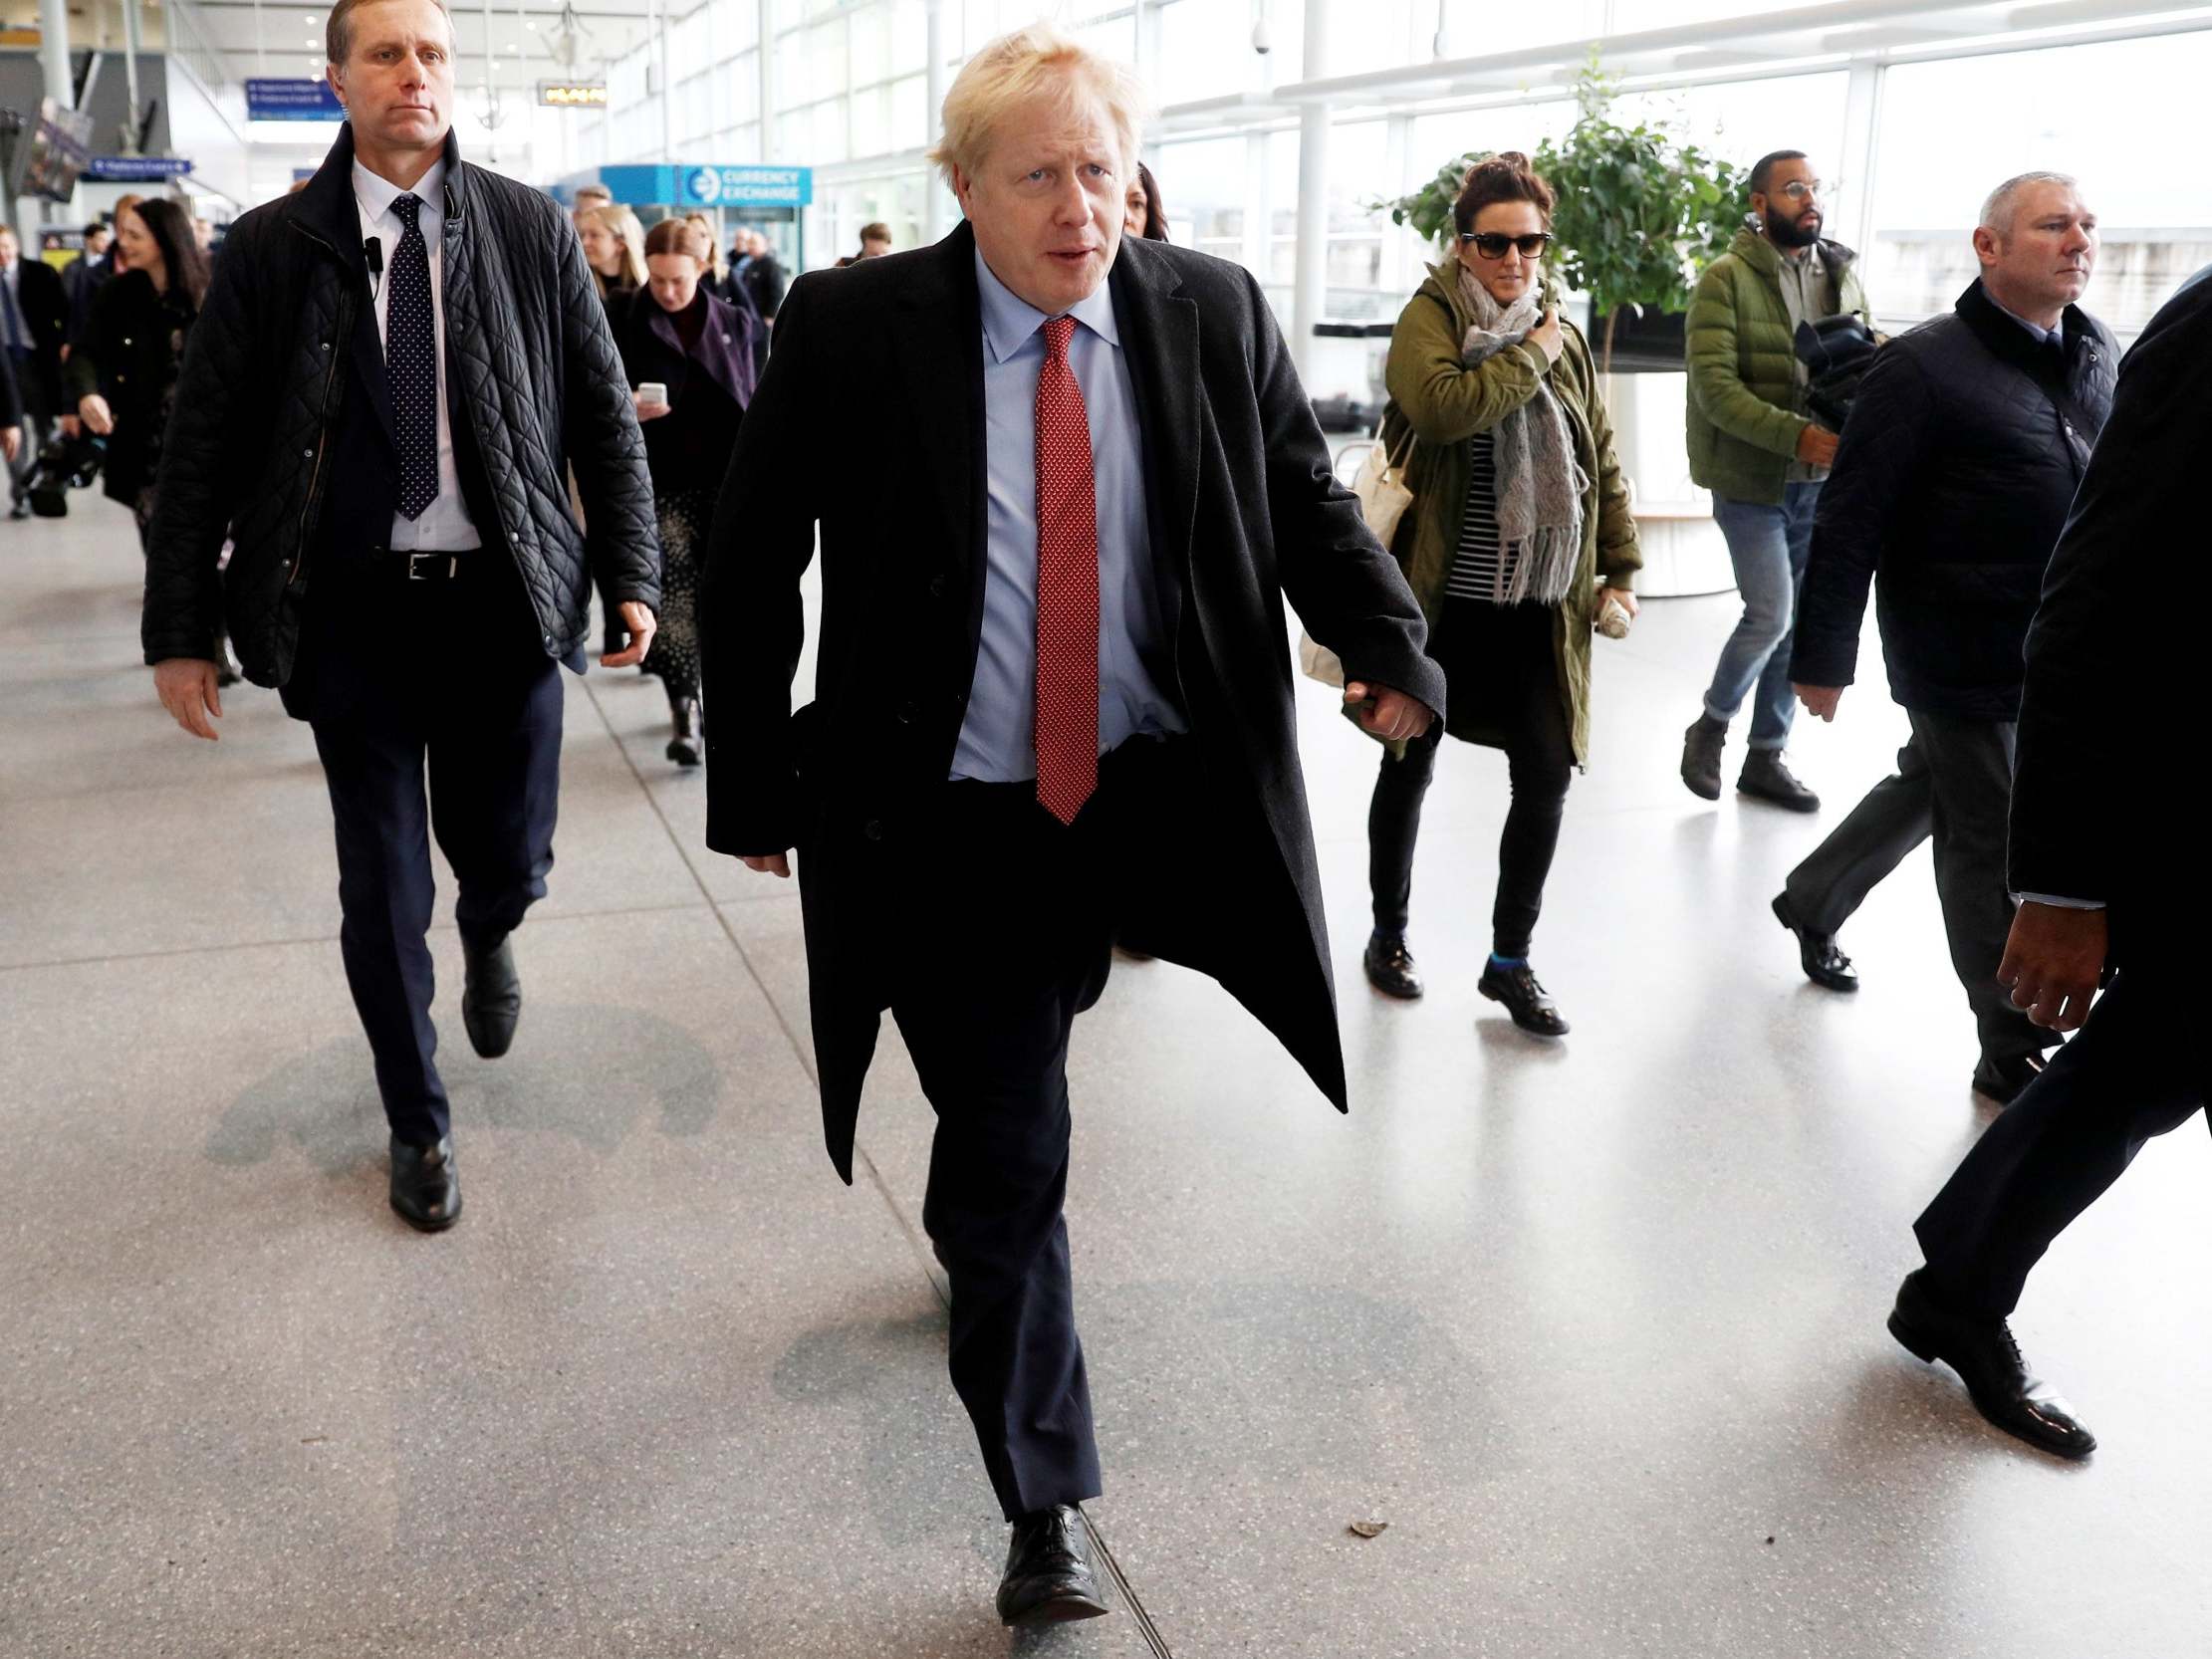 Johnson arrives at Ebbsfleet station in Kent on the campaign trail yesterday